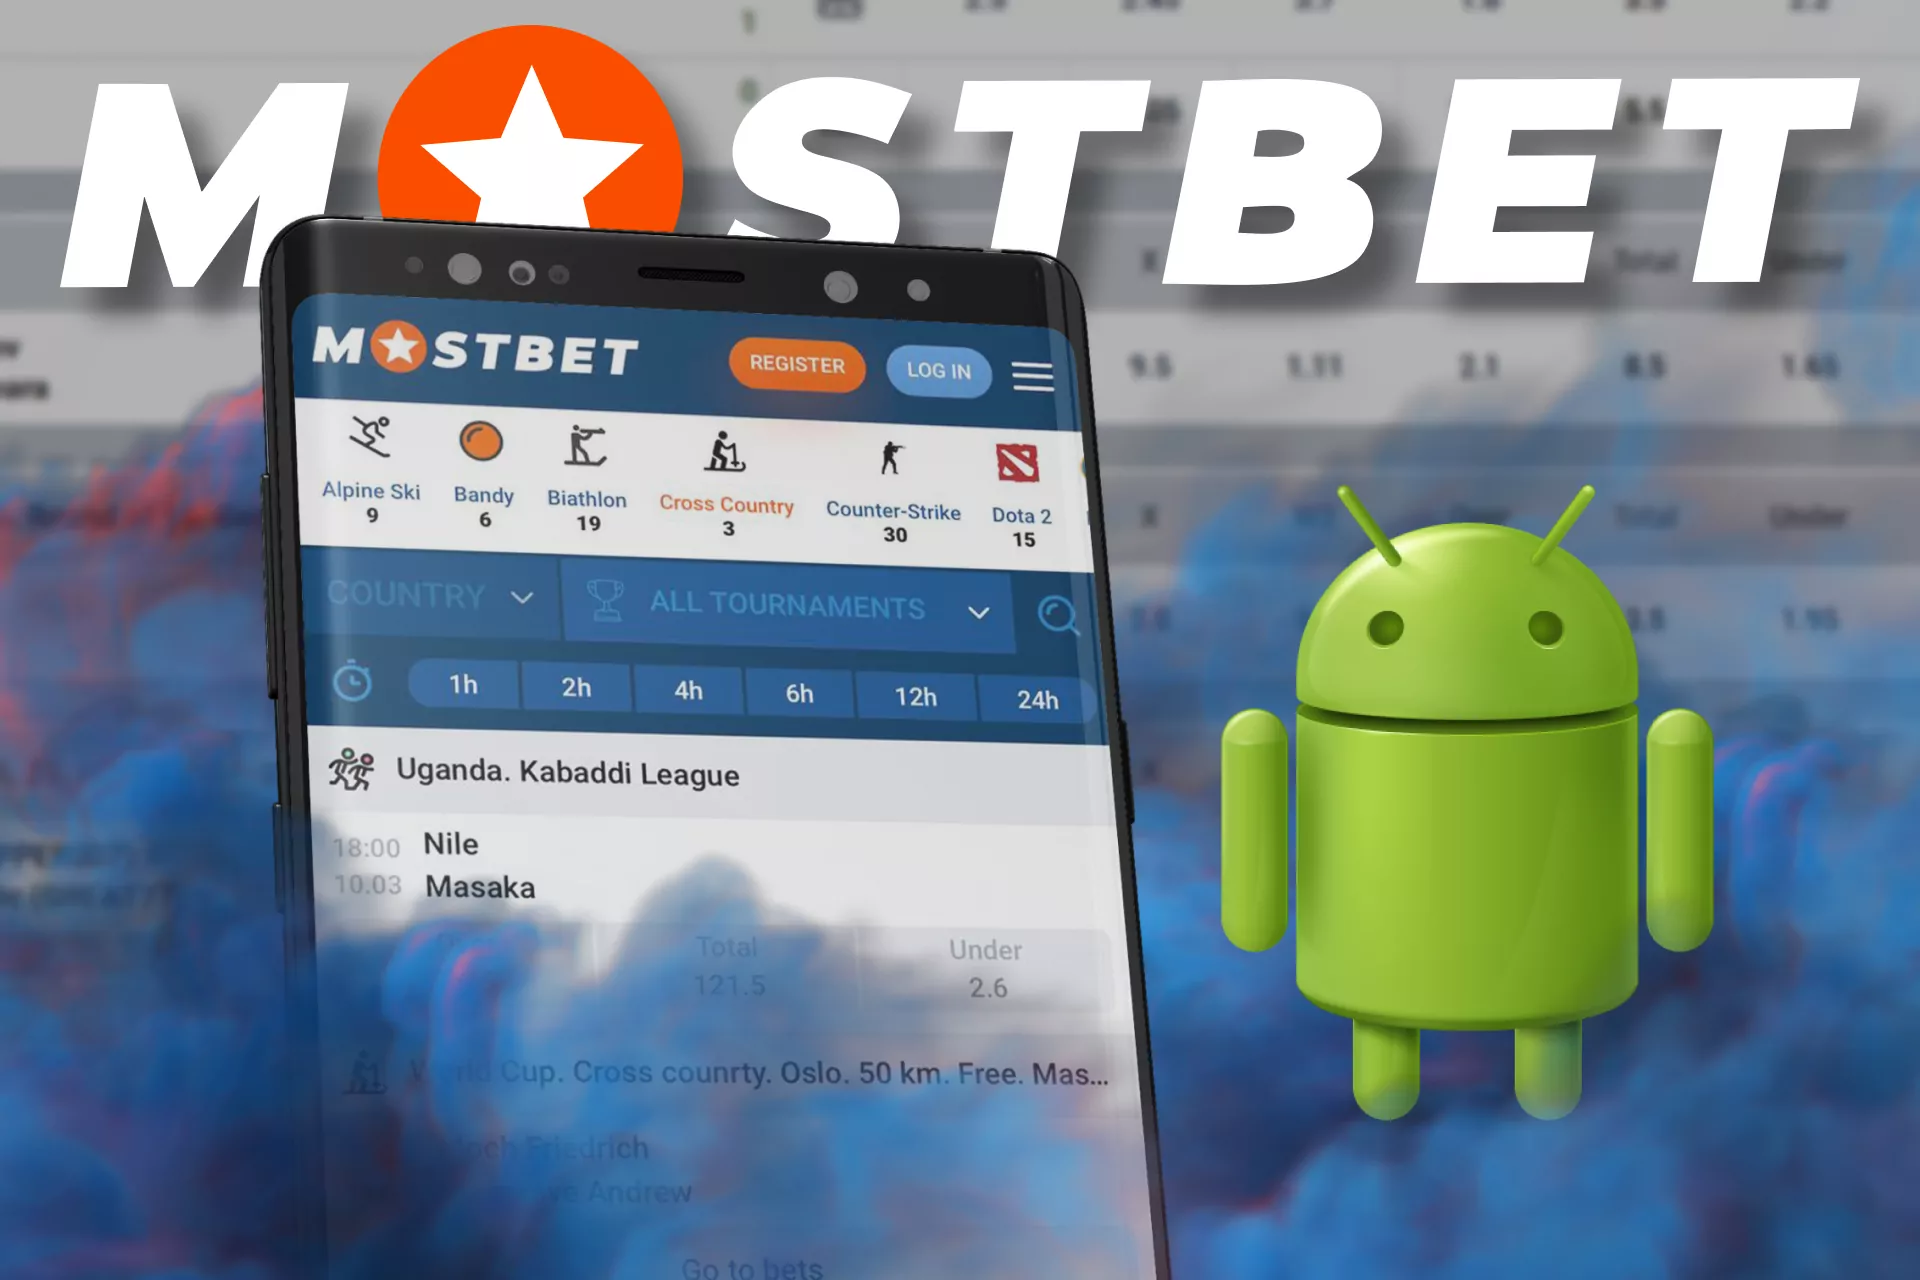 On Mostbet, bet on kabaddi right from your Android phone.